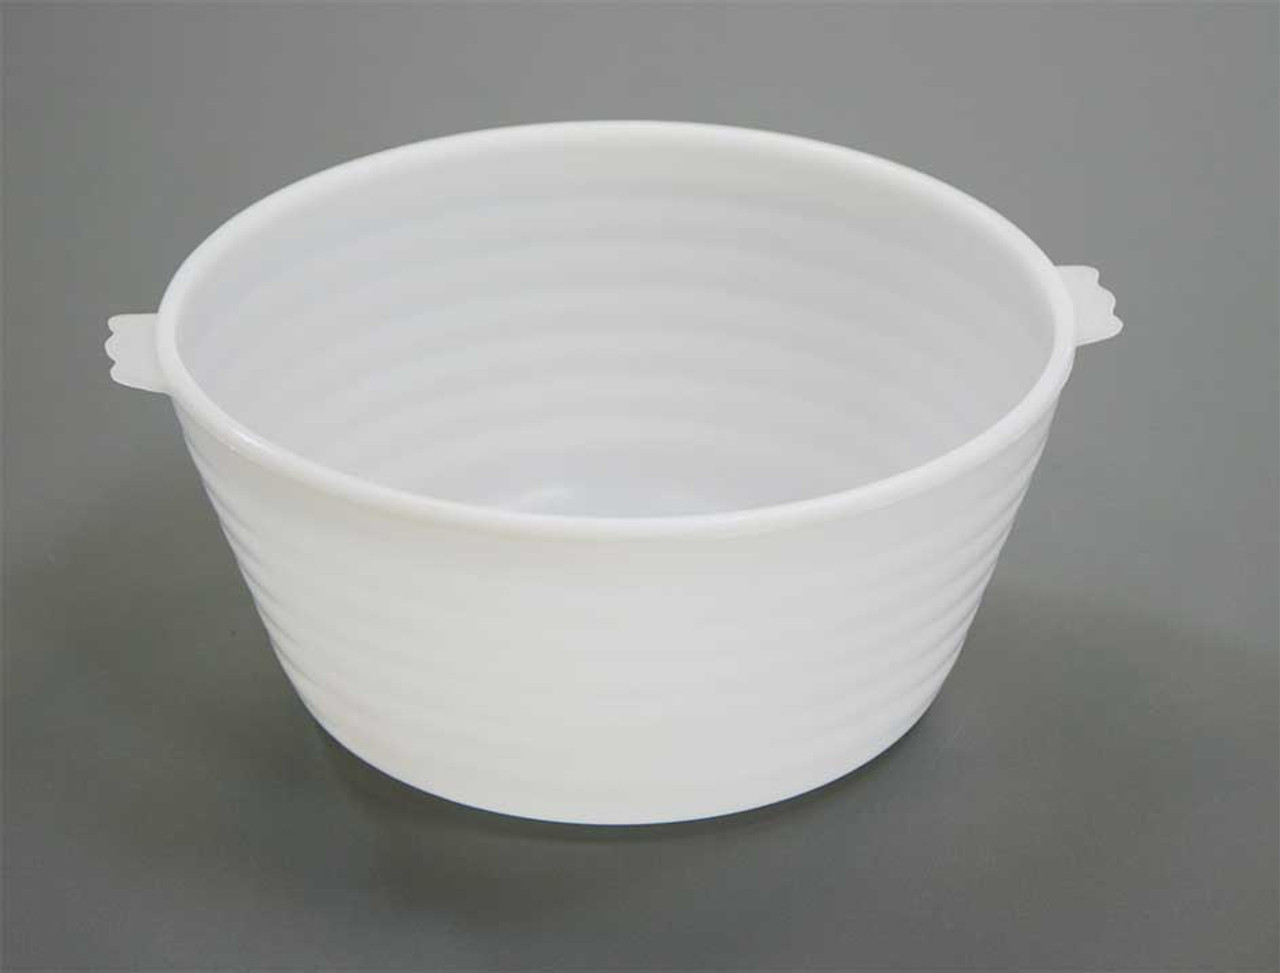 Description Disposable Bowl 3000 ml
Material of Construction: High Density Polyethylene (HDPE) – rigid, white
- FDA acceptable CFR 177.1520
- EU Regulations 10/2011 compliant
- EC Regulations 1935/2004 compliant
Method of Construction: Single piece, injection moulded
Max. Diameter (including handles): 256mm
OD at top rim (excluding handles): 227mm
ID at top rim: 216mm
Depth of Bowl: 109mm
Nominal Weight: 170g
Moulding & Packing Environment: Class 100,000 Cleanroom
Individually Bagged? Yes (heat sealed PE bag)
Method of Sterilisation: Gamma Irradiation (25-45kGy)
Number of Bowls per Box: 15
BSE/TSE Free: Yes
Recommended Storage Conditions: Dry and ambient temperature